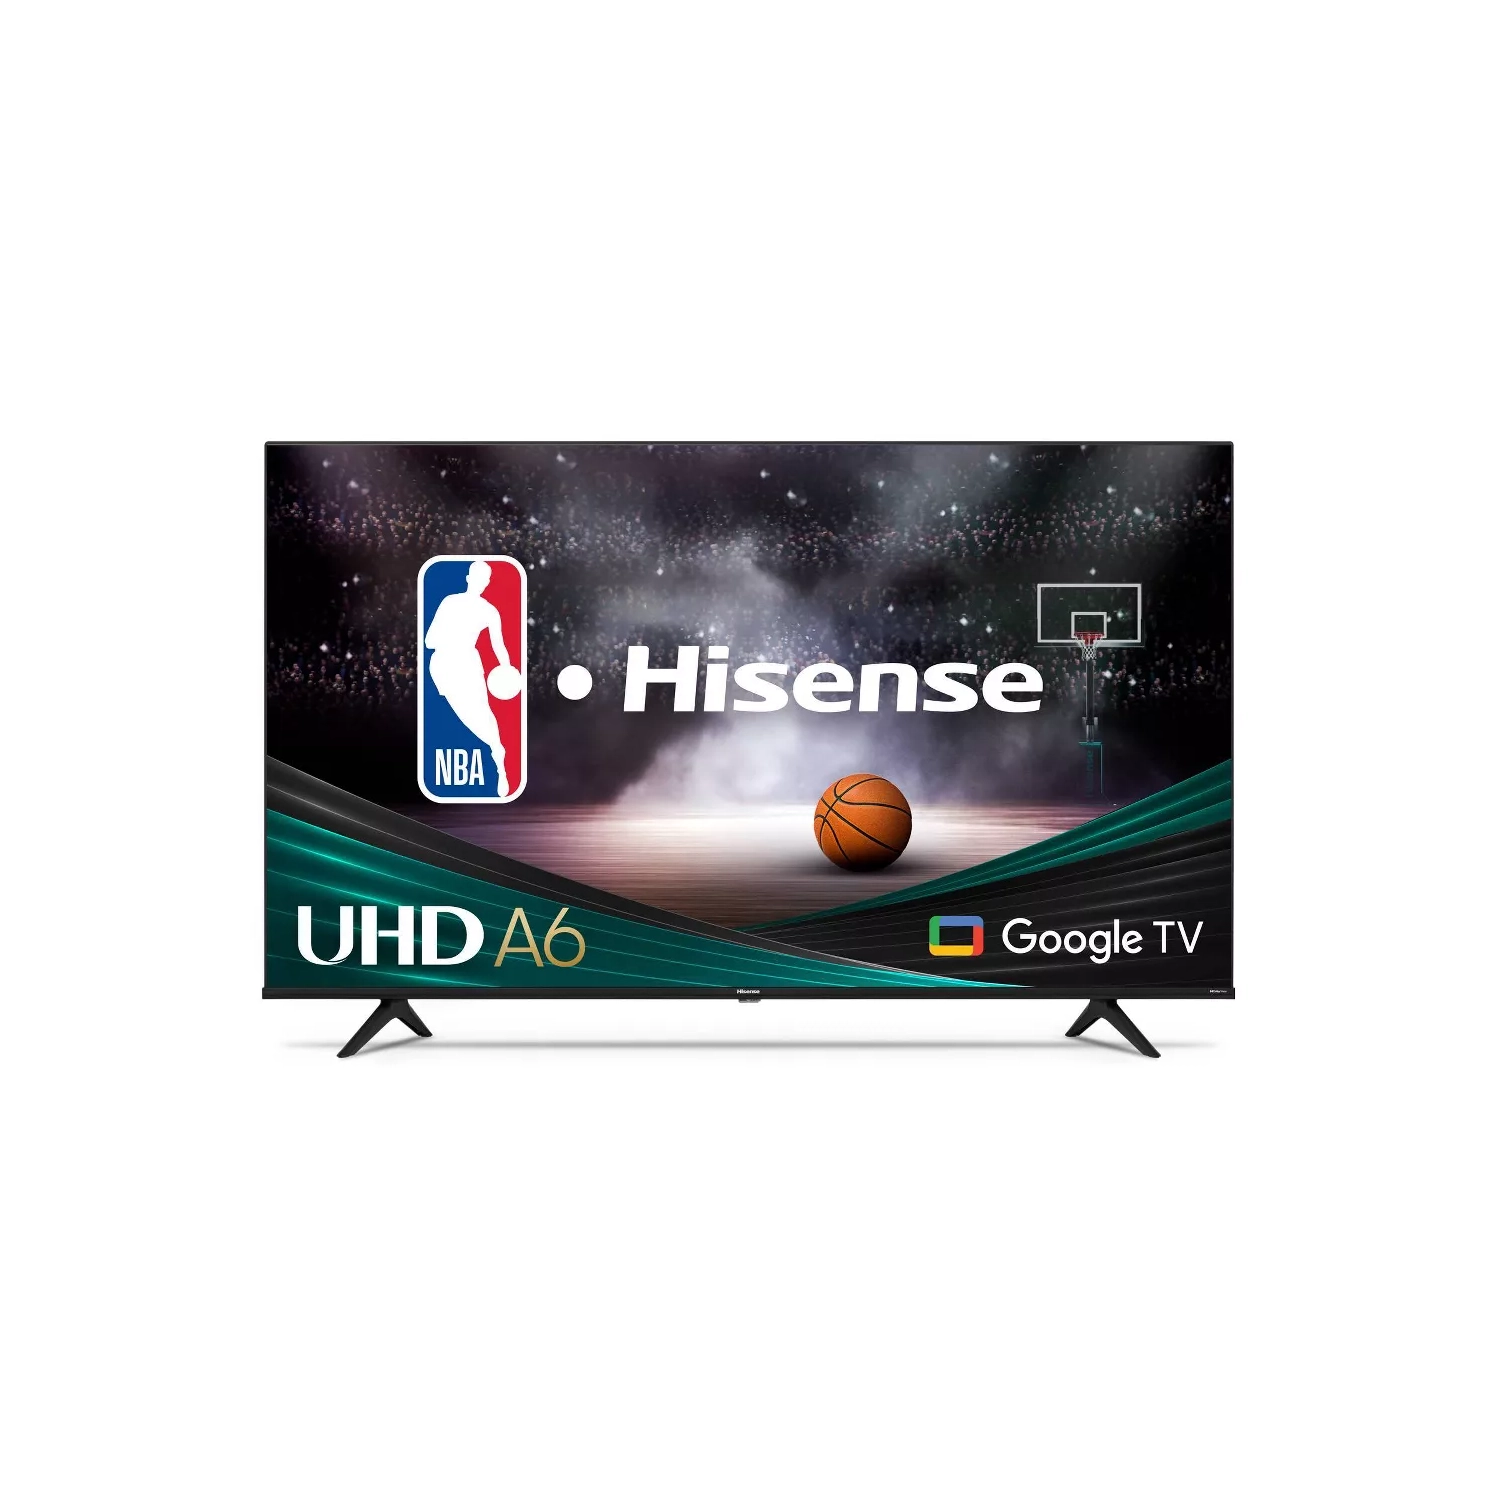 Hisense A6 Series 55-Inch Class 4K UHD Smart Google TV with Voice Remote, Dolby Vision HDR, DTS Virtual X, Sports & Game Modes, Chromecast Built-in (55A6H, 2022 New Model) Black